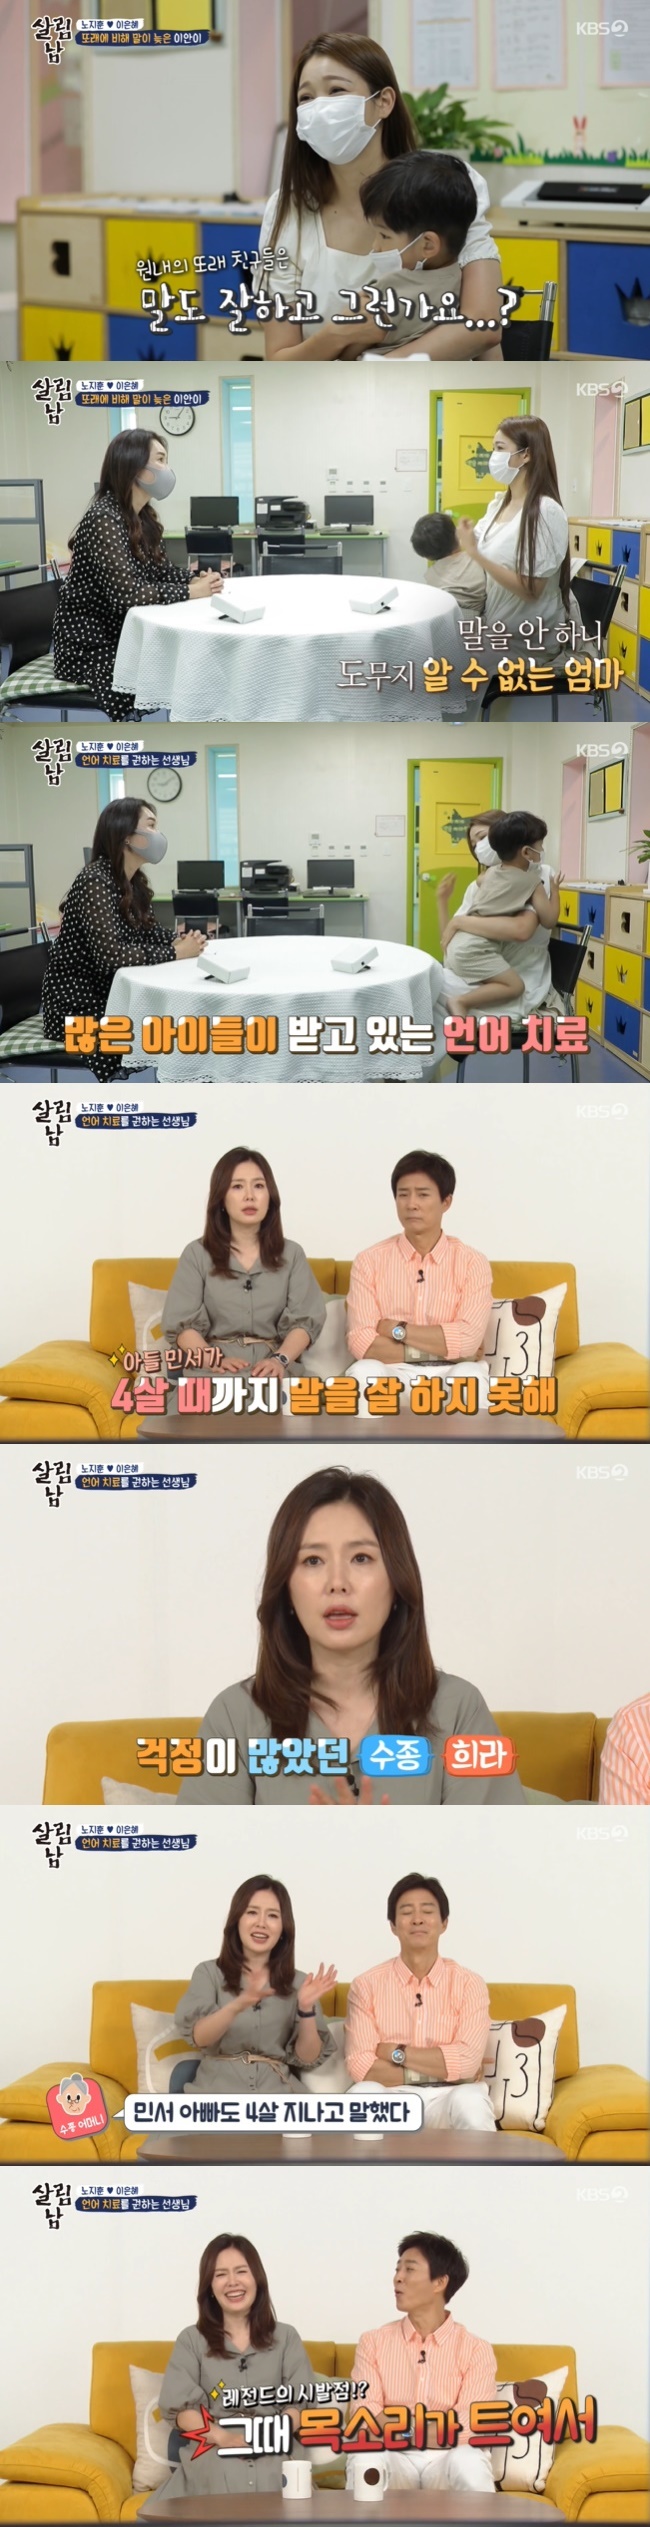 Choi Soo-jong, Ha Hee-ra sympathized with Roh Ji-hoon and Lee Eun-hye, who are worried about the late development of language.On KBS 2TVs Season 2 of Living Men, which aired on July 17, Lee Eun-hye was shocked after receiving regular counseling from parents of the nursery school of Son Ian-yi.Roh Ji-hoon and Lee Eun-hyes son nursery teacher told Lee Eun-hye, who had been in counseling, In March, I did not see my eyes well and I did not recognize it well.Especially when the language is not good, I can not interact with the friends, so I am irritated, angry, and used a lot of crowds.  We want to know what the child wants, but Ian can not speak.Ian must have been stressed in his own way. Lee Eun-hye said, The most heartbreaking of all the stories was that I could not get along with my children.Ian thought that there would be a lot of hurt, so that was the most heartbreaking. Lee asked her what her children were like for another month. She said, There is a private car, but there is a friend who tells her doctor at her age.You can talk to your peer friends even in two or three sentences, Lee said. Its so frustrating.Im upset that theres something that she wants, but she doesnt speak, so I cant do it.The teacher comforted Lee Eun-hye with the condition of Ian, who was better than the beginning of the semester, but advised him to get help from experts before he was 5 years old.Ha Hee-ra said, In fact, my son Minseo was worried that he could not speak well until he was four years old.He said that after he was four years old. Choi Soo-jong said, I just cried without saying a word.